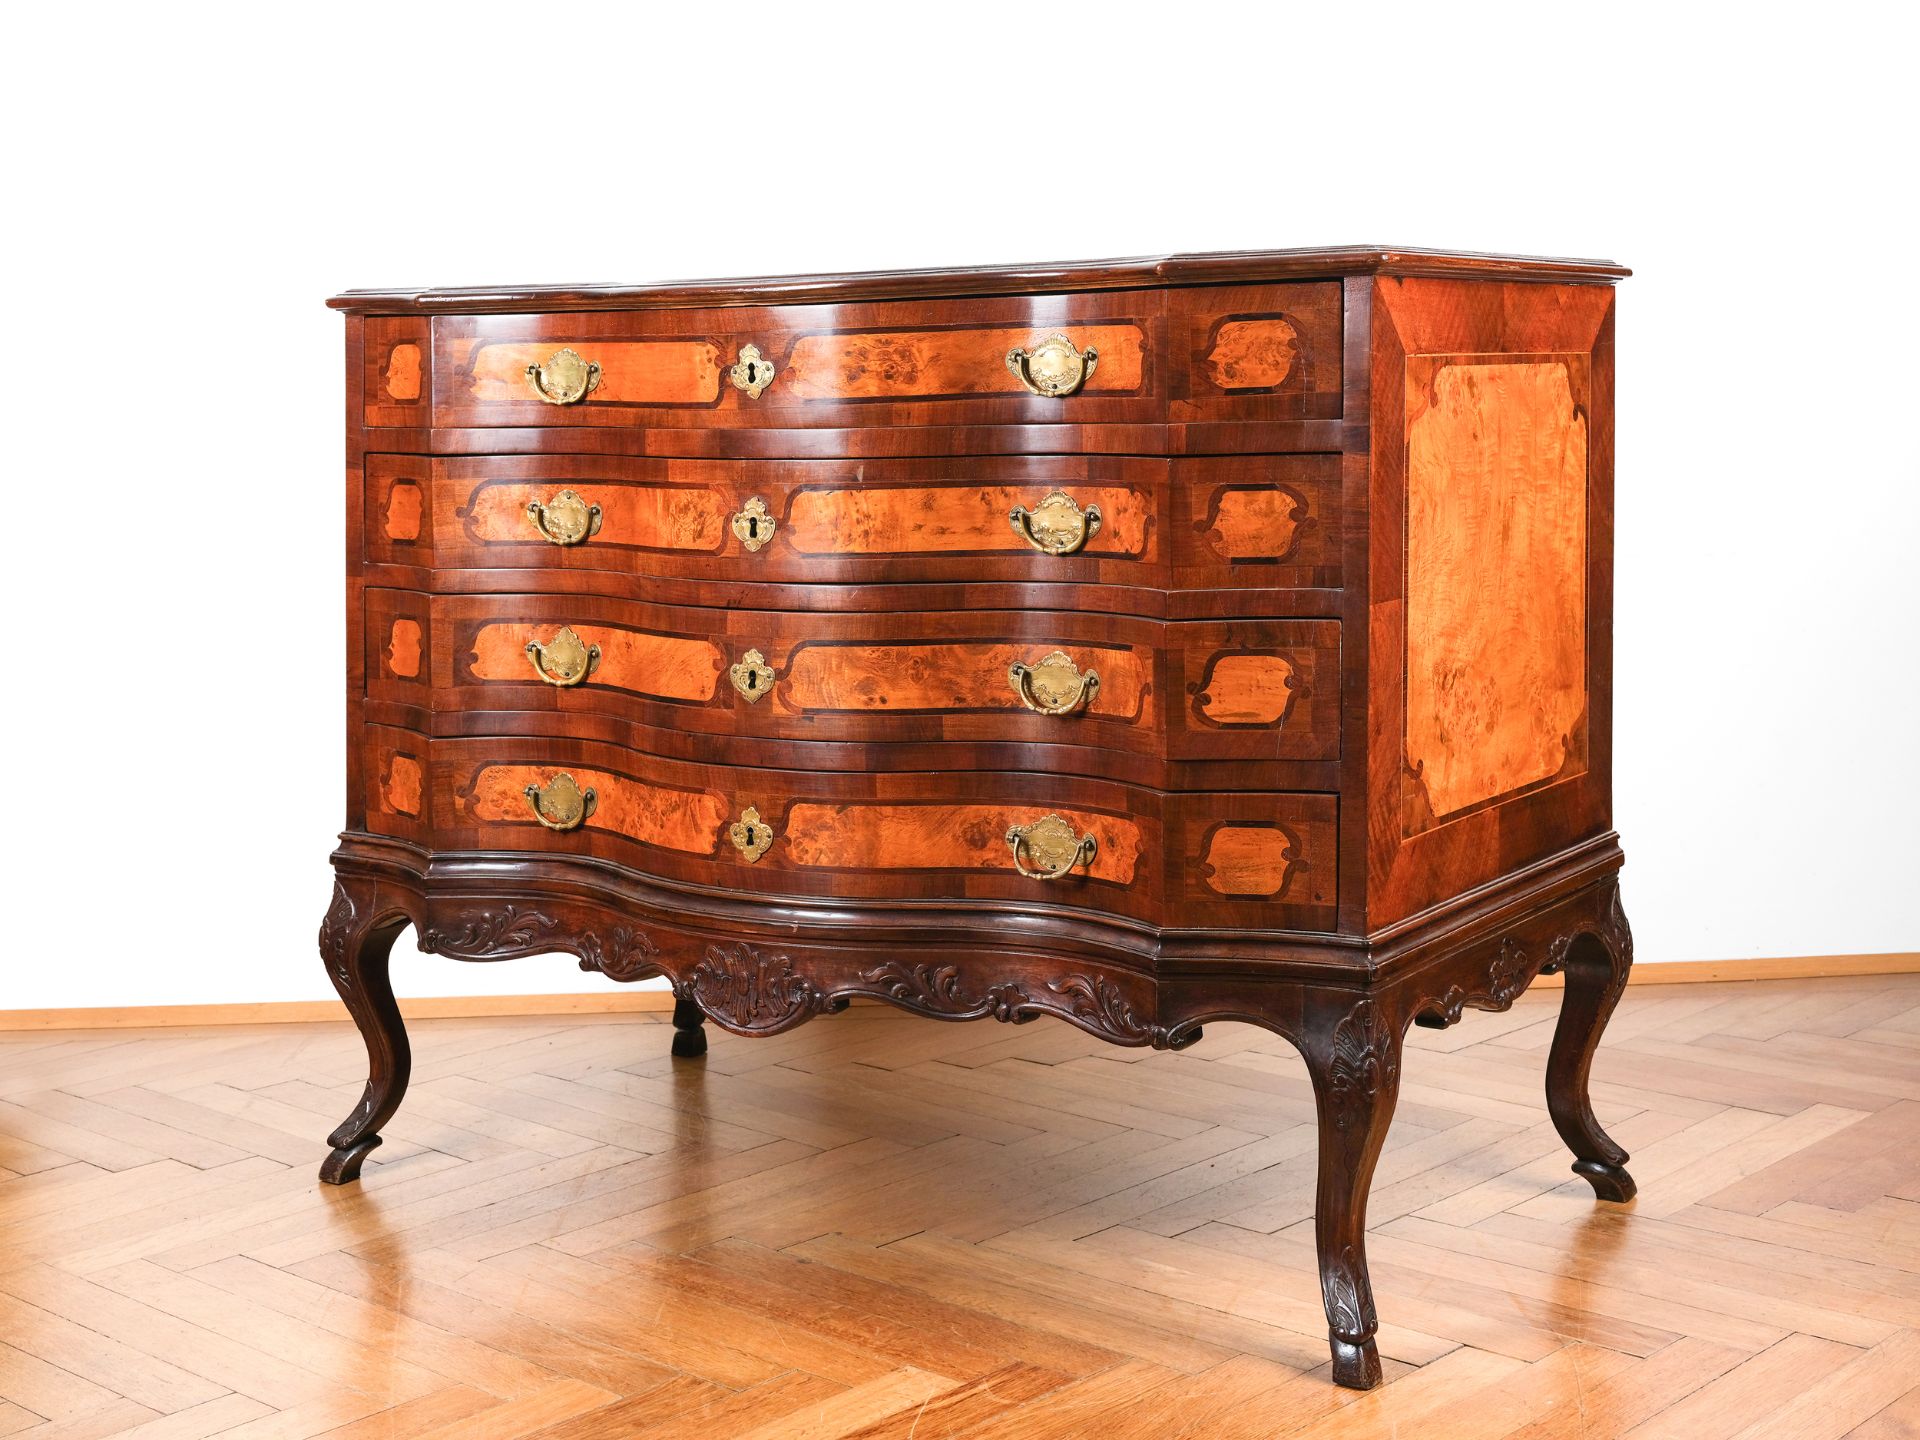 Chest with drawers, Four drawers, South German - Image 2 of 4